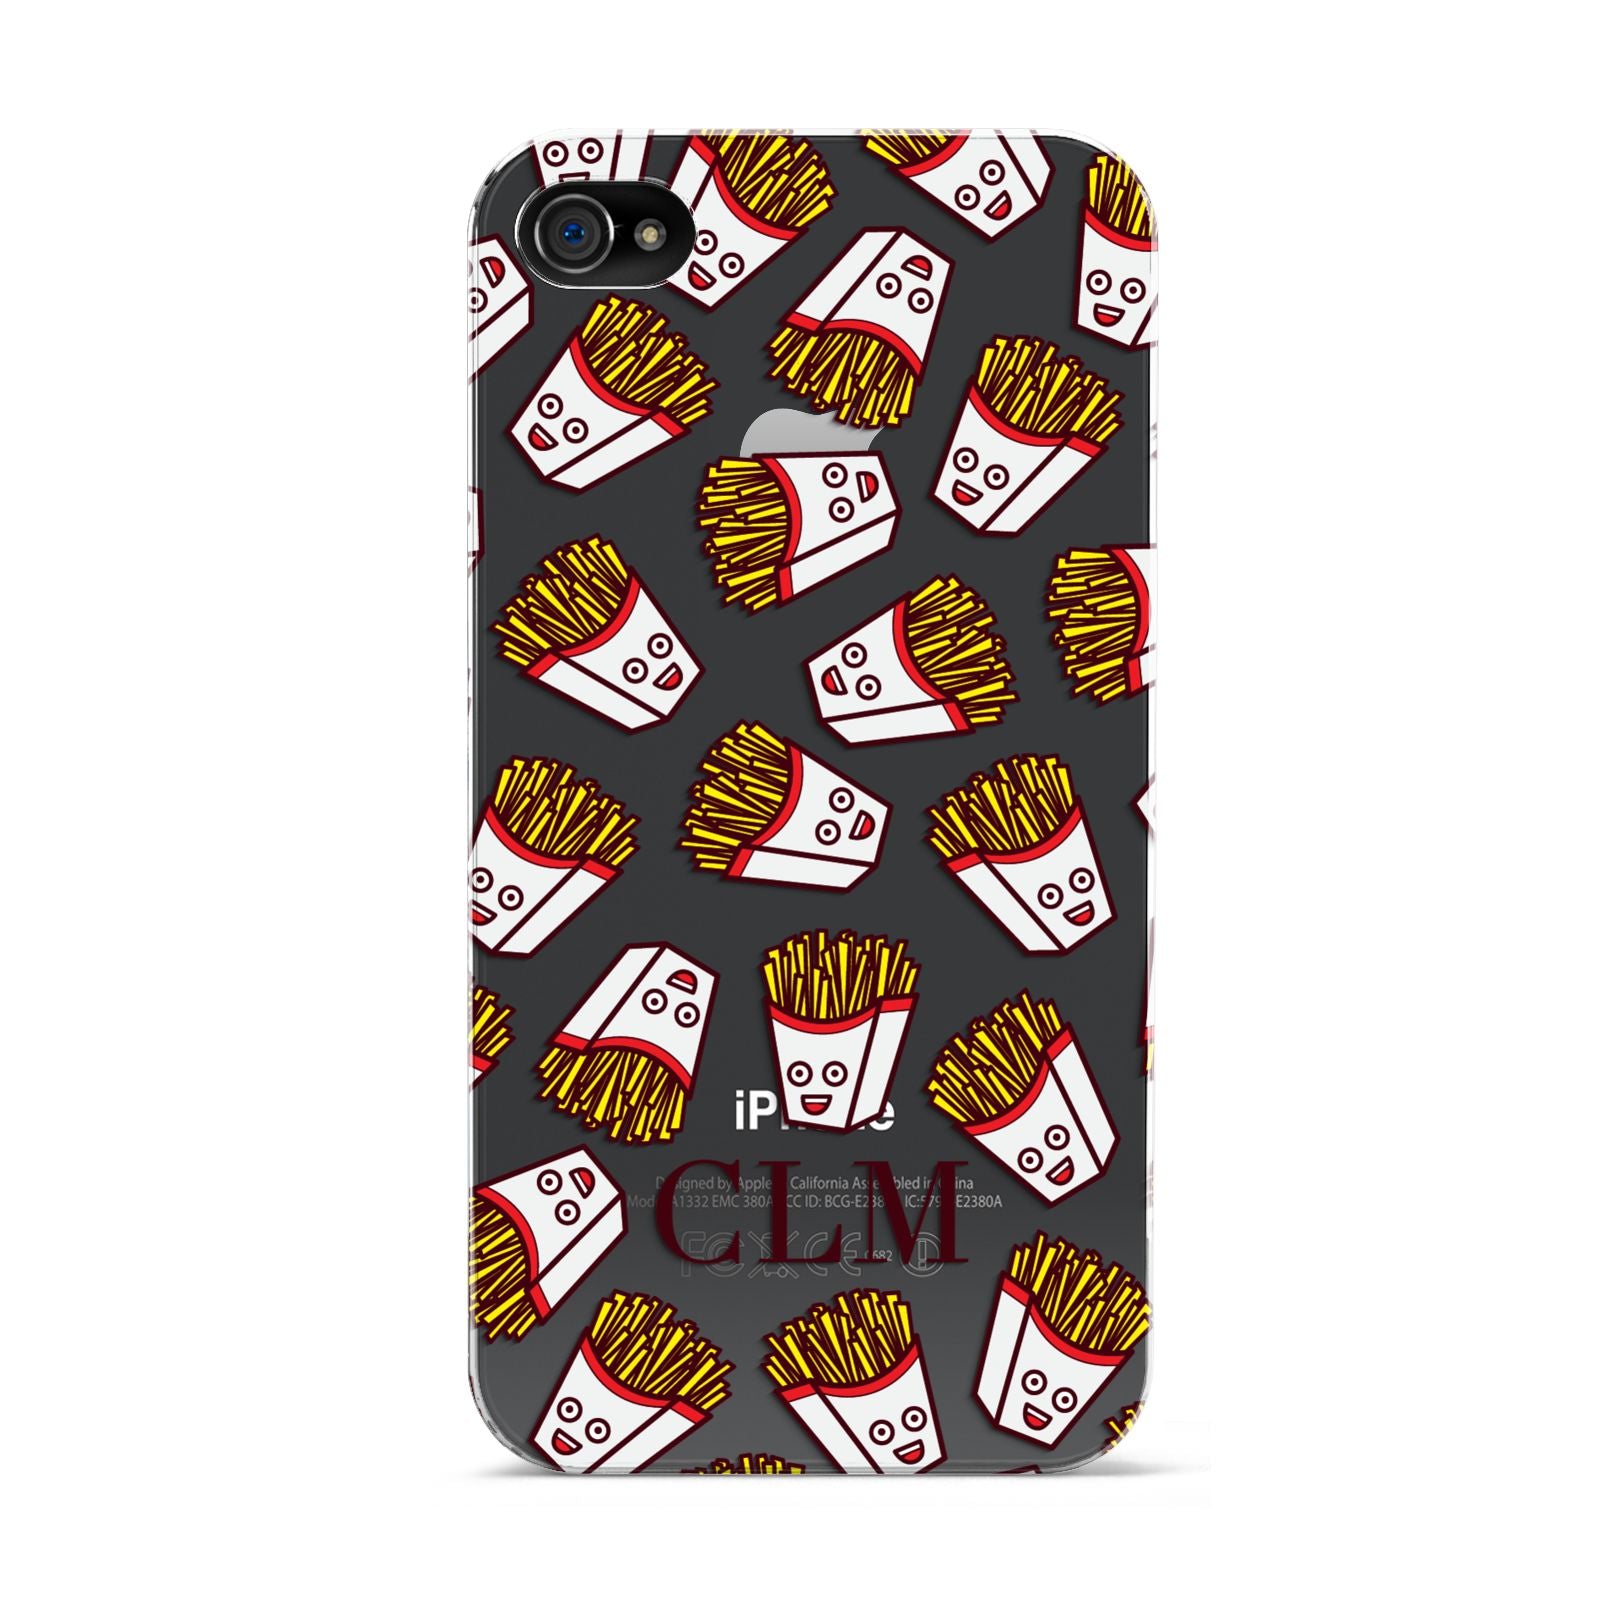 Personalised Fries Initials Clear Apple iPhone 4s Case